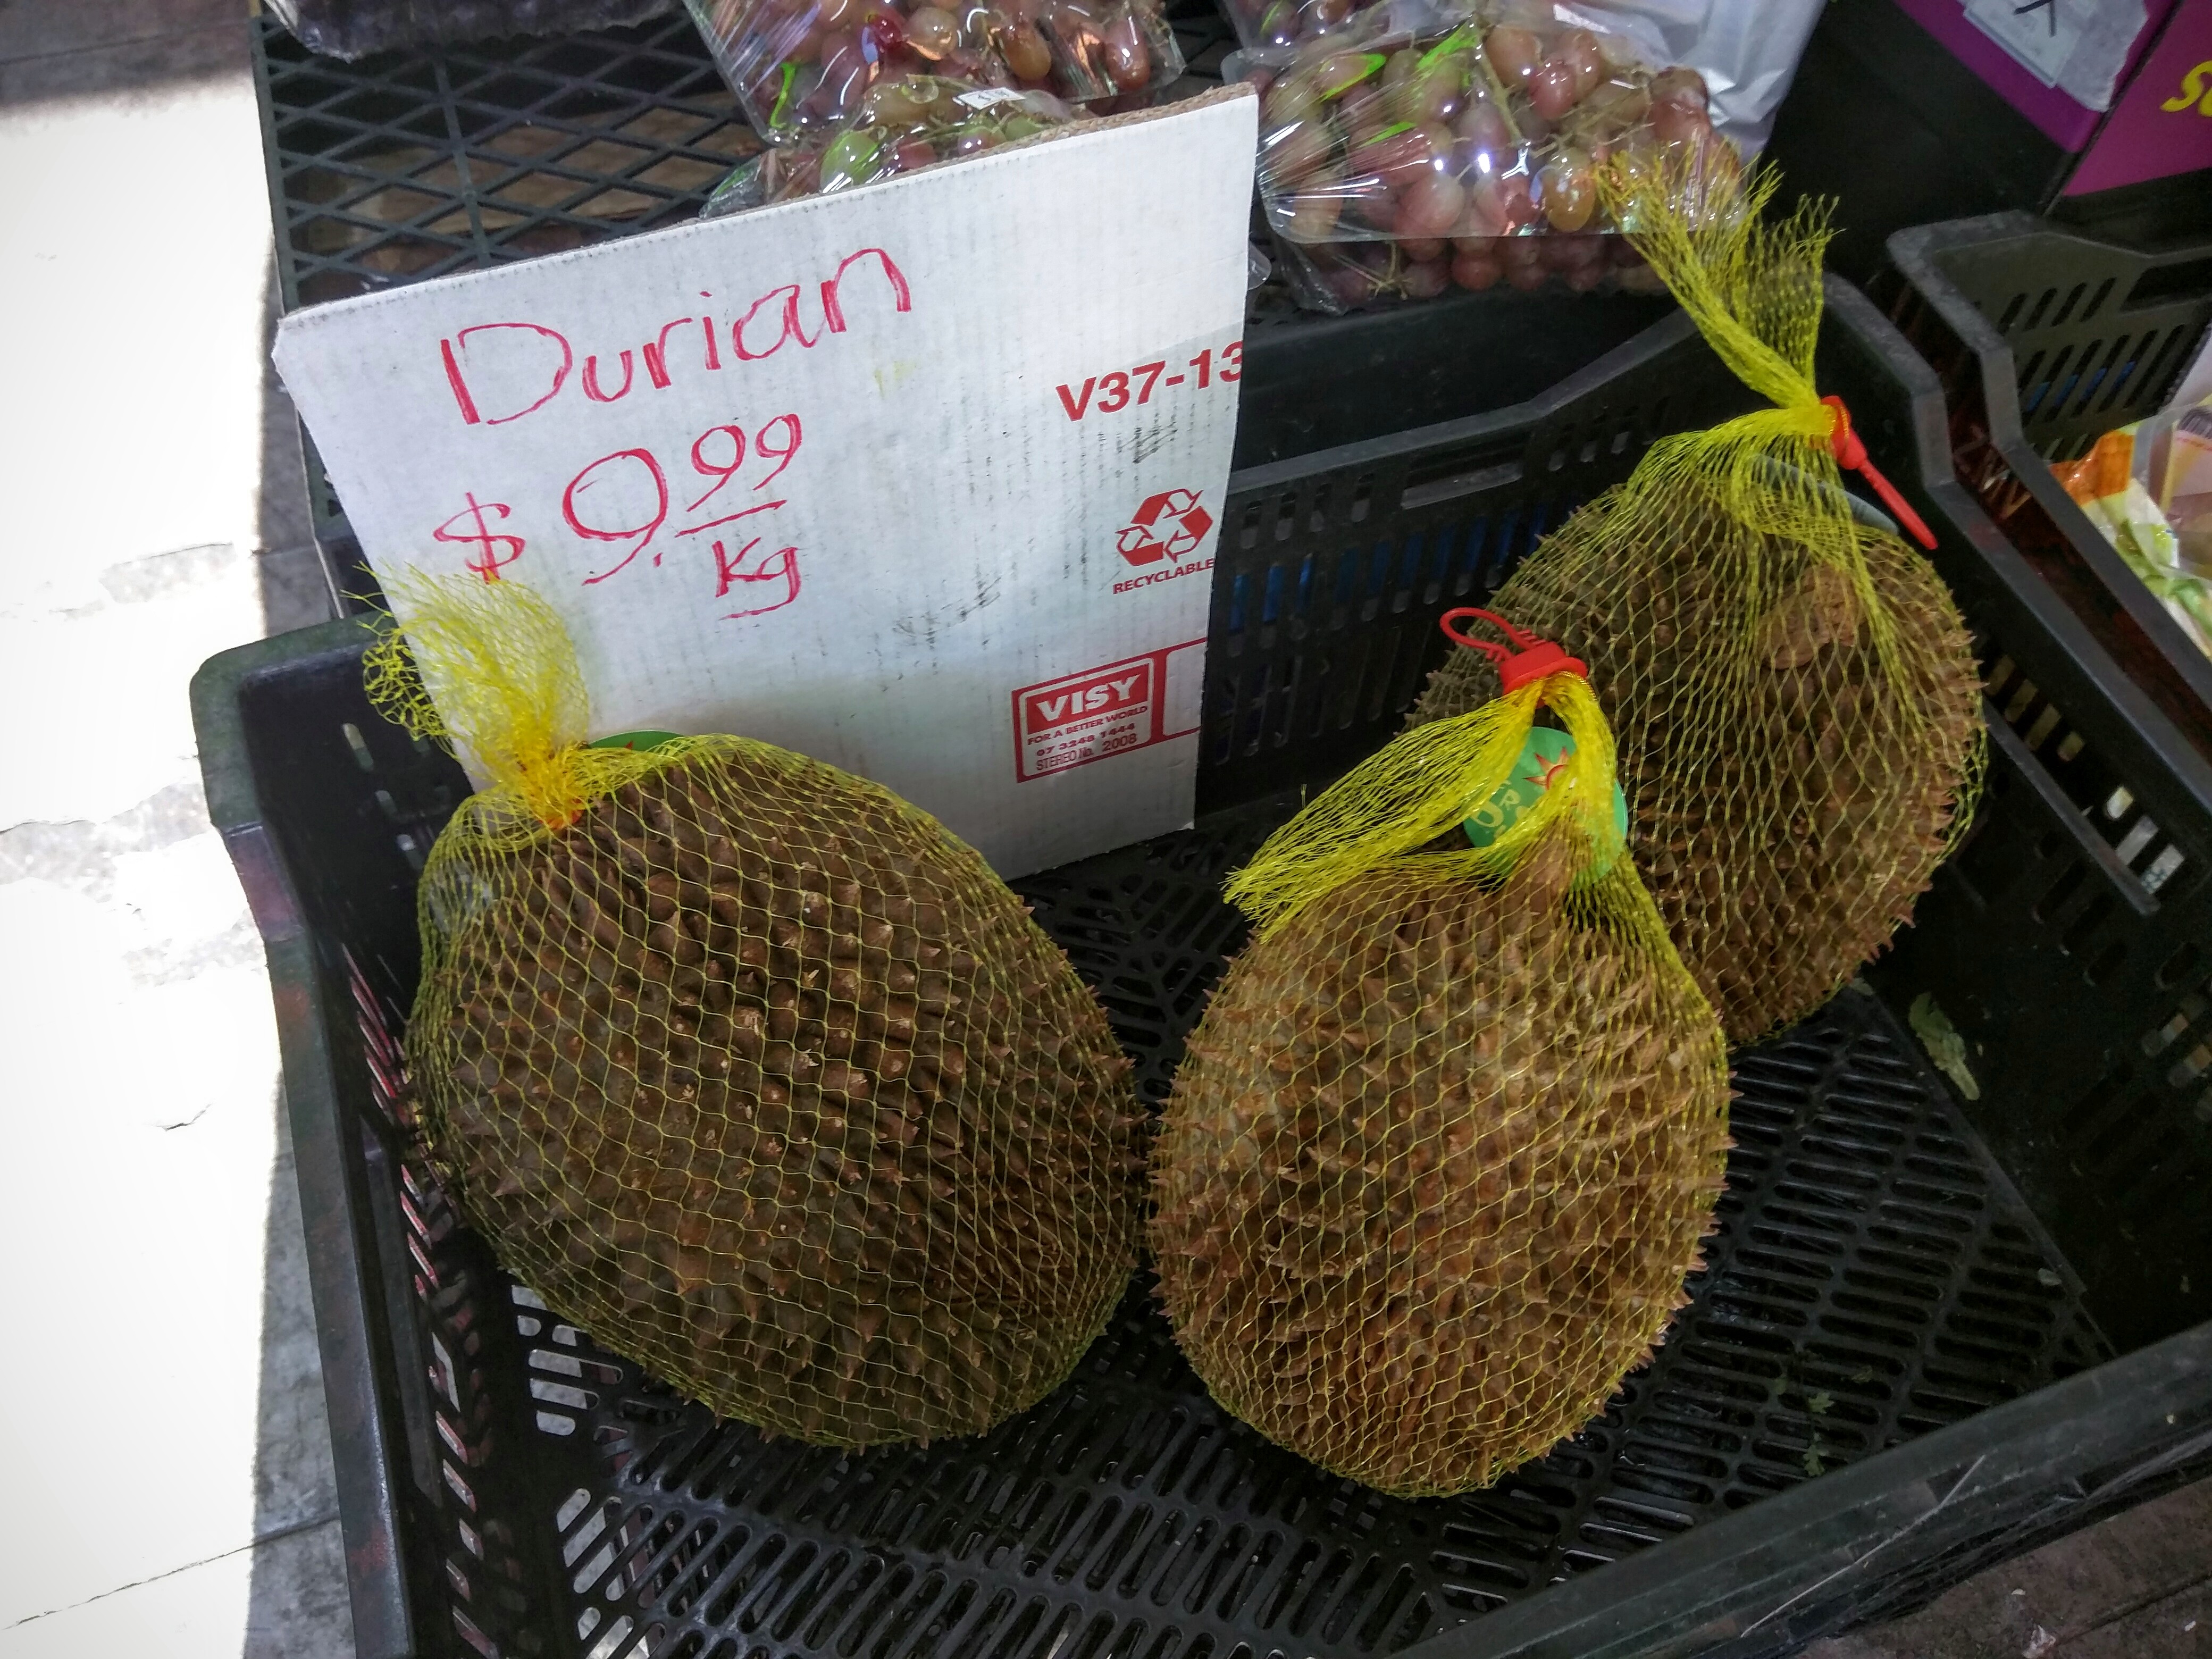 File:Durian for sale in Sydney store.jpg - Wikimedia Commons